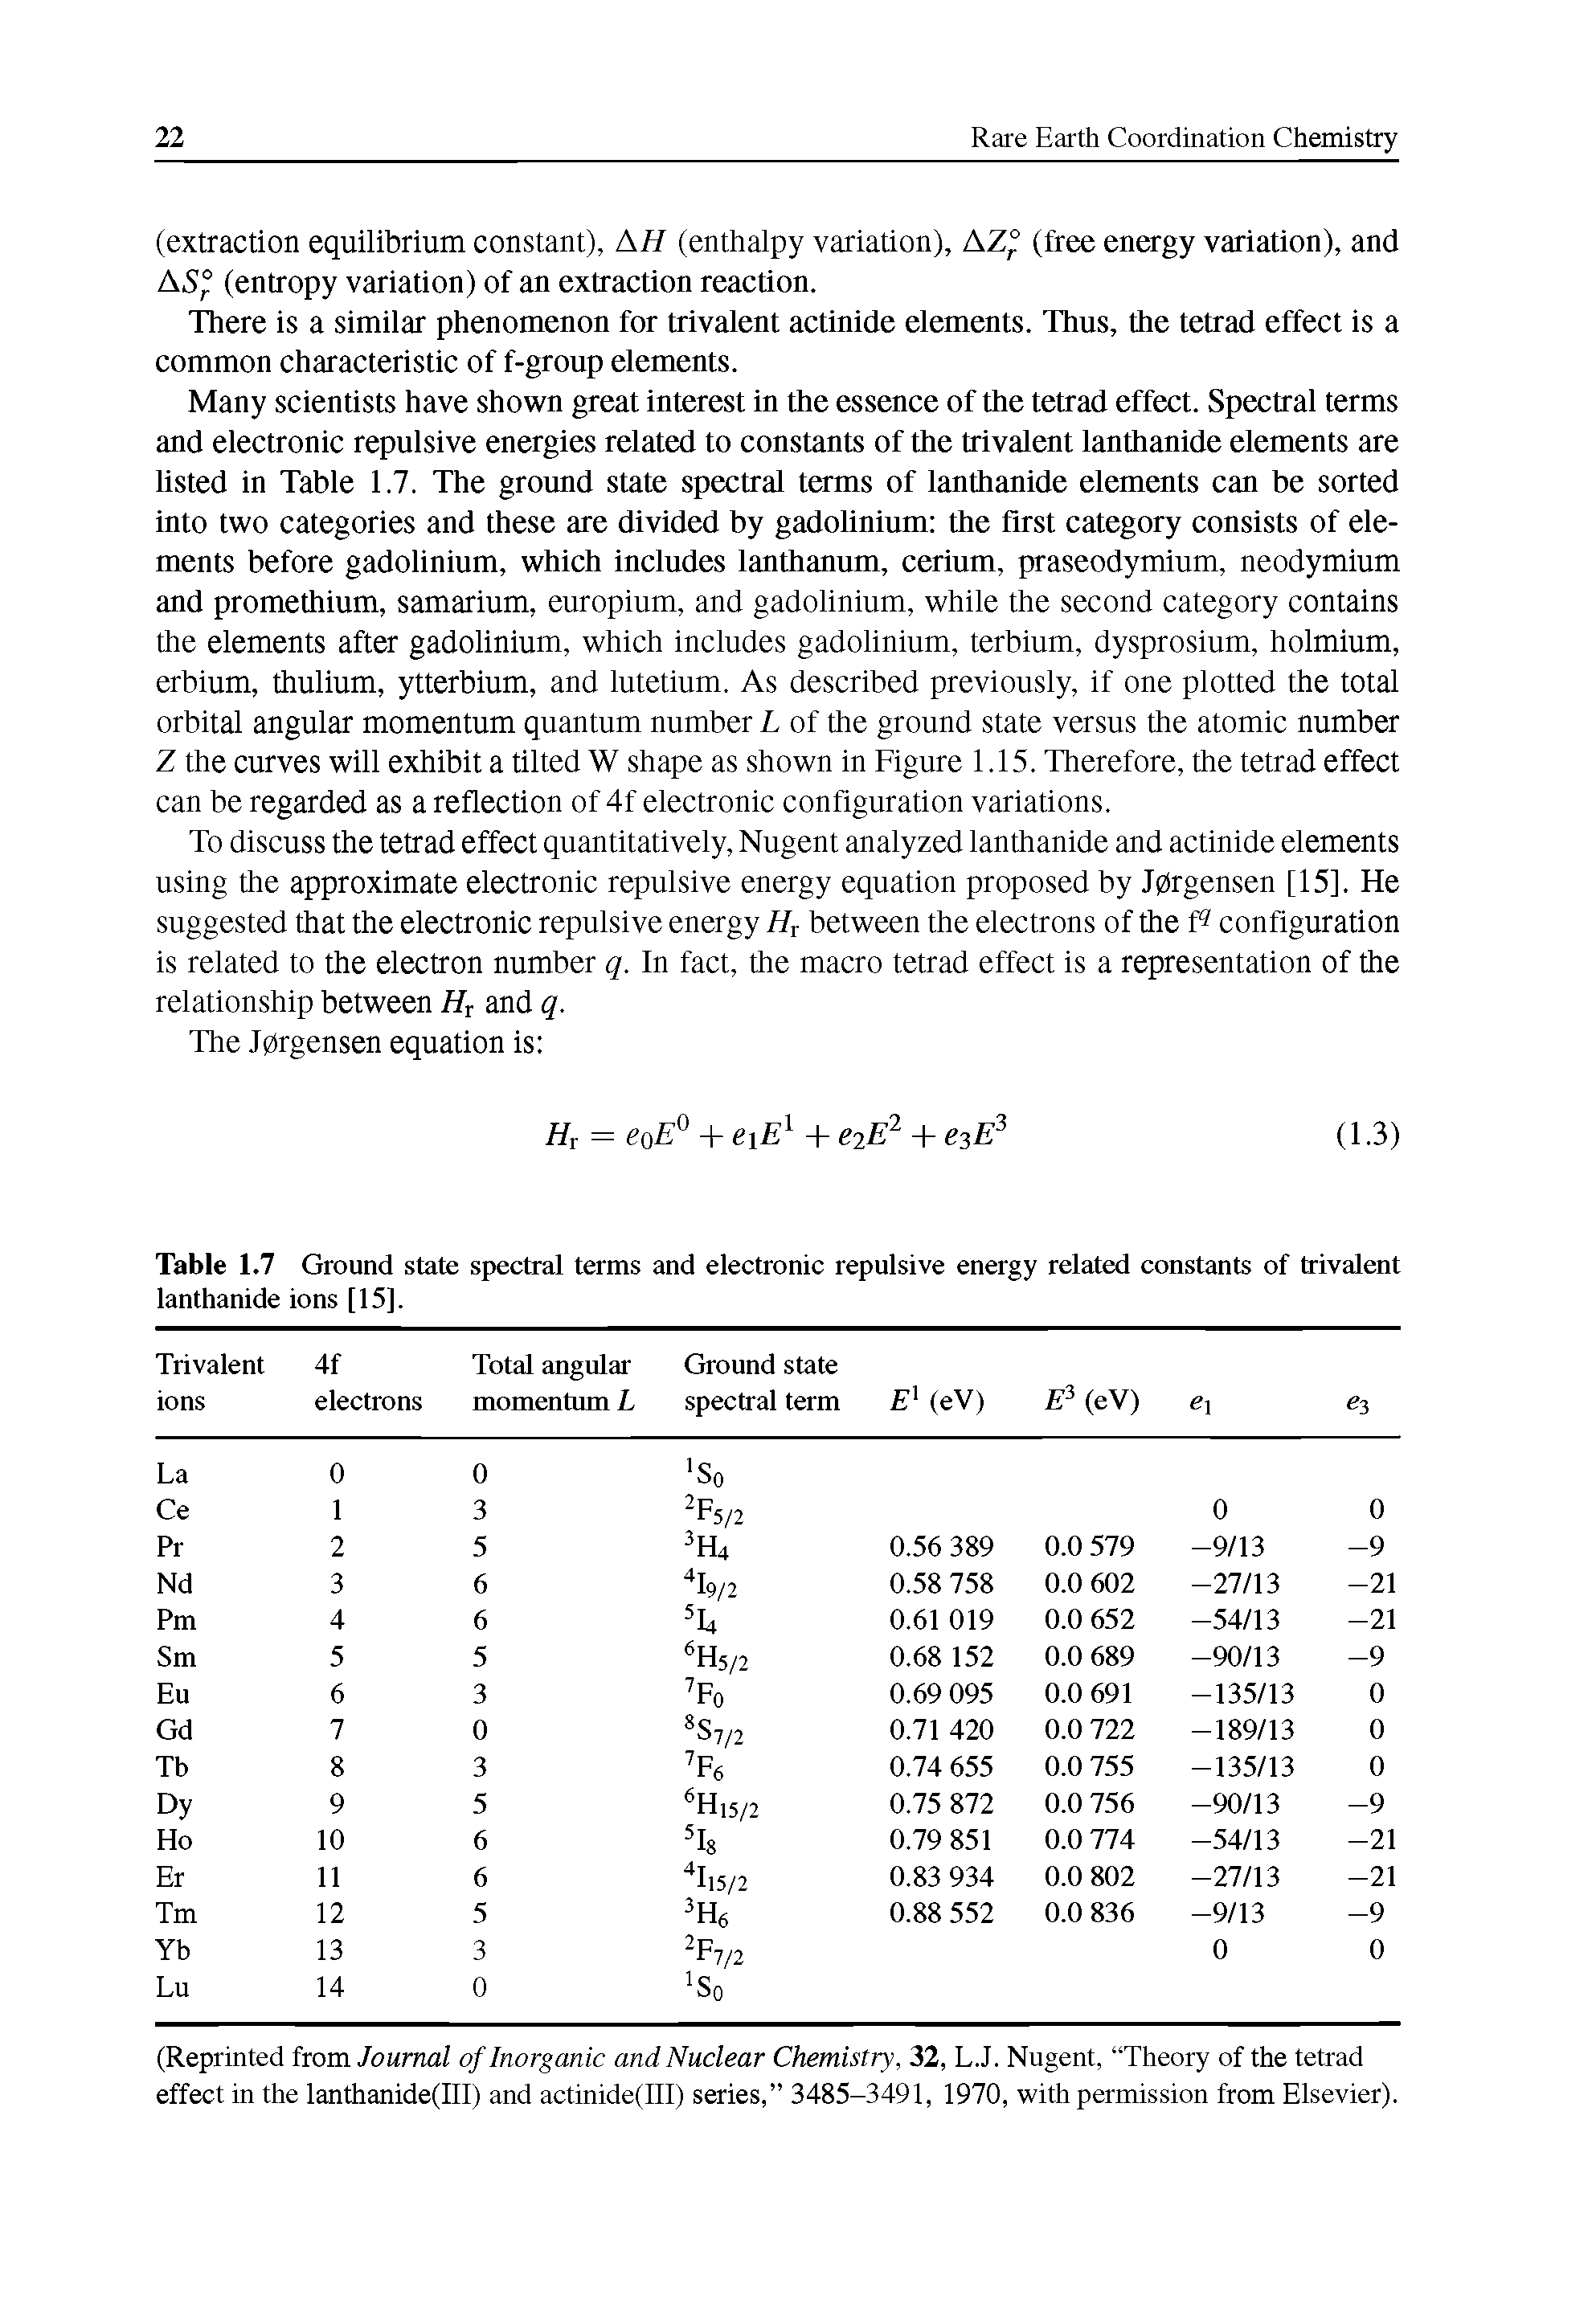 Table 1.7 Ground state spectral terms and electronic repulsive energy related constants of trivalent lanthanide ions [15].